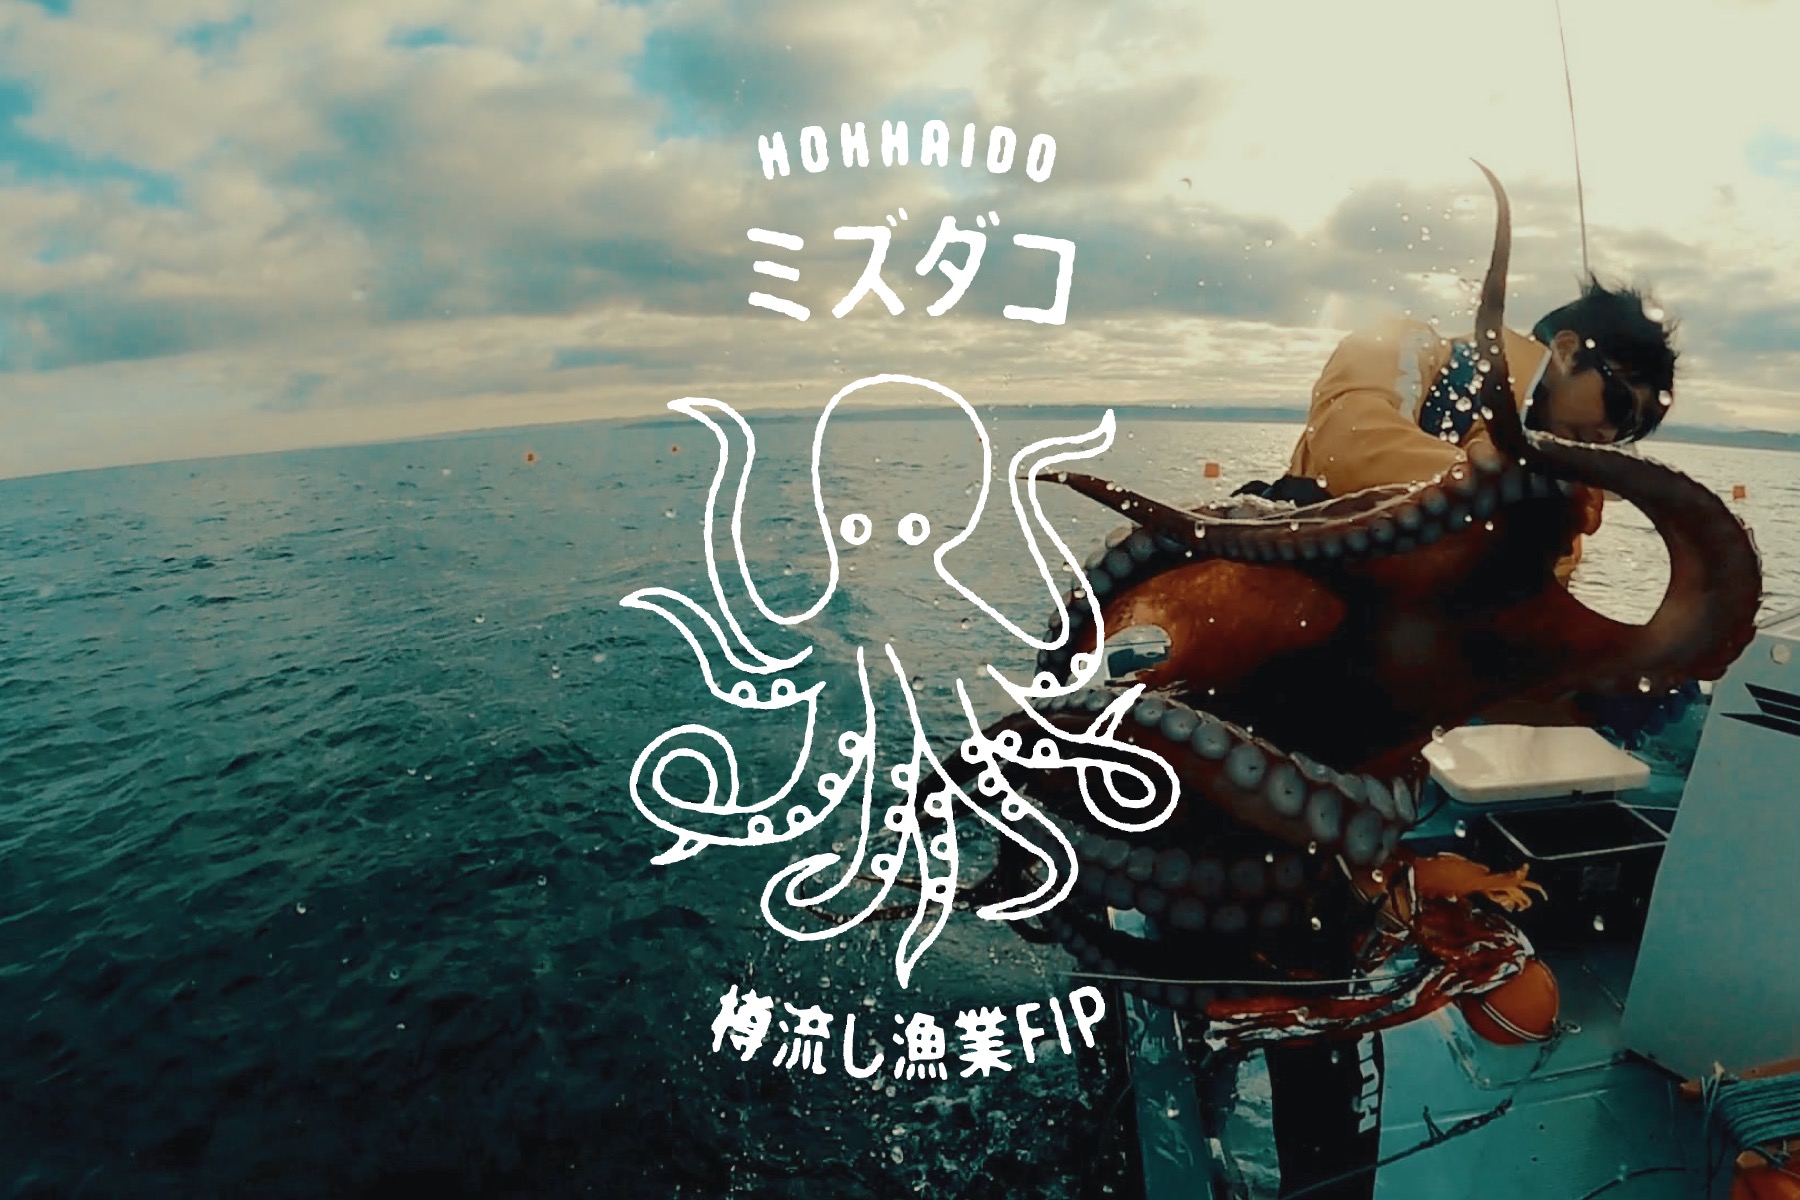 HOKKAIDO TOMAMAE GIANT PACIFIC OCTOPUS<br> BARREL FLOWING FISHERY IMPROVEMENT PROJECT (FIP)